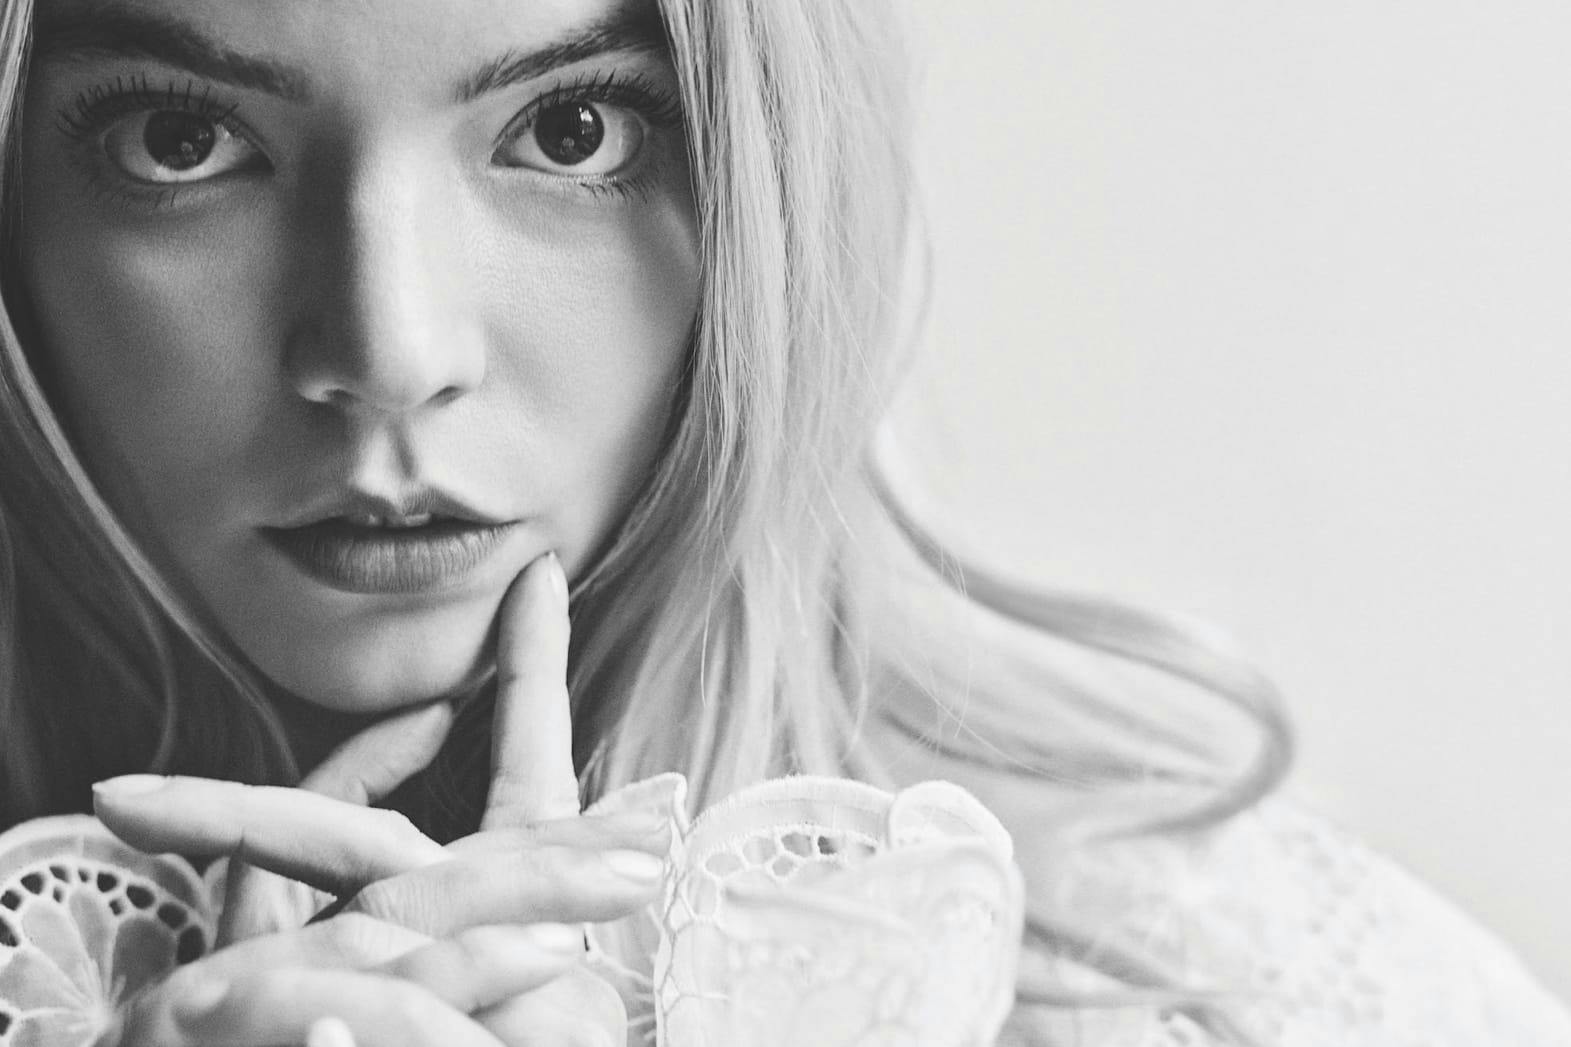 Anya Taylor-Joy is the breakout star of 2020